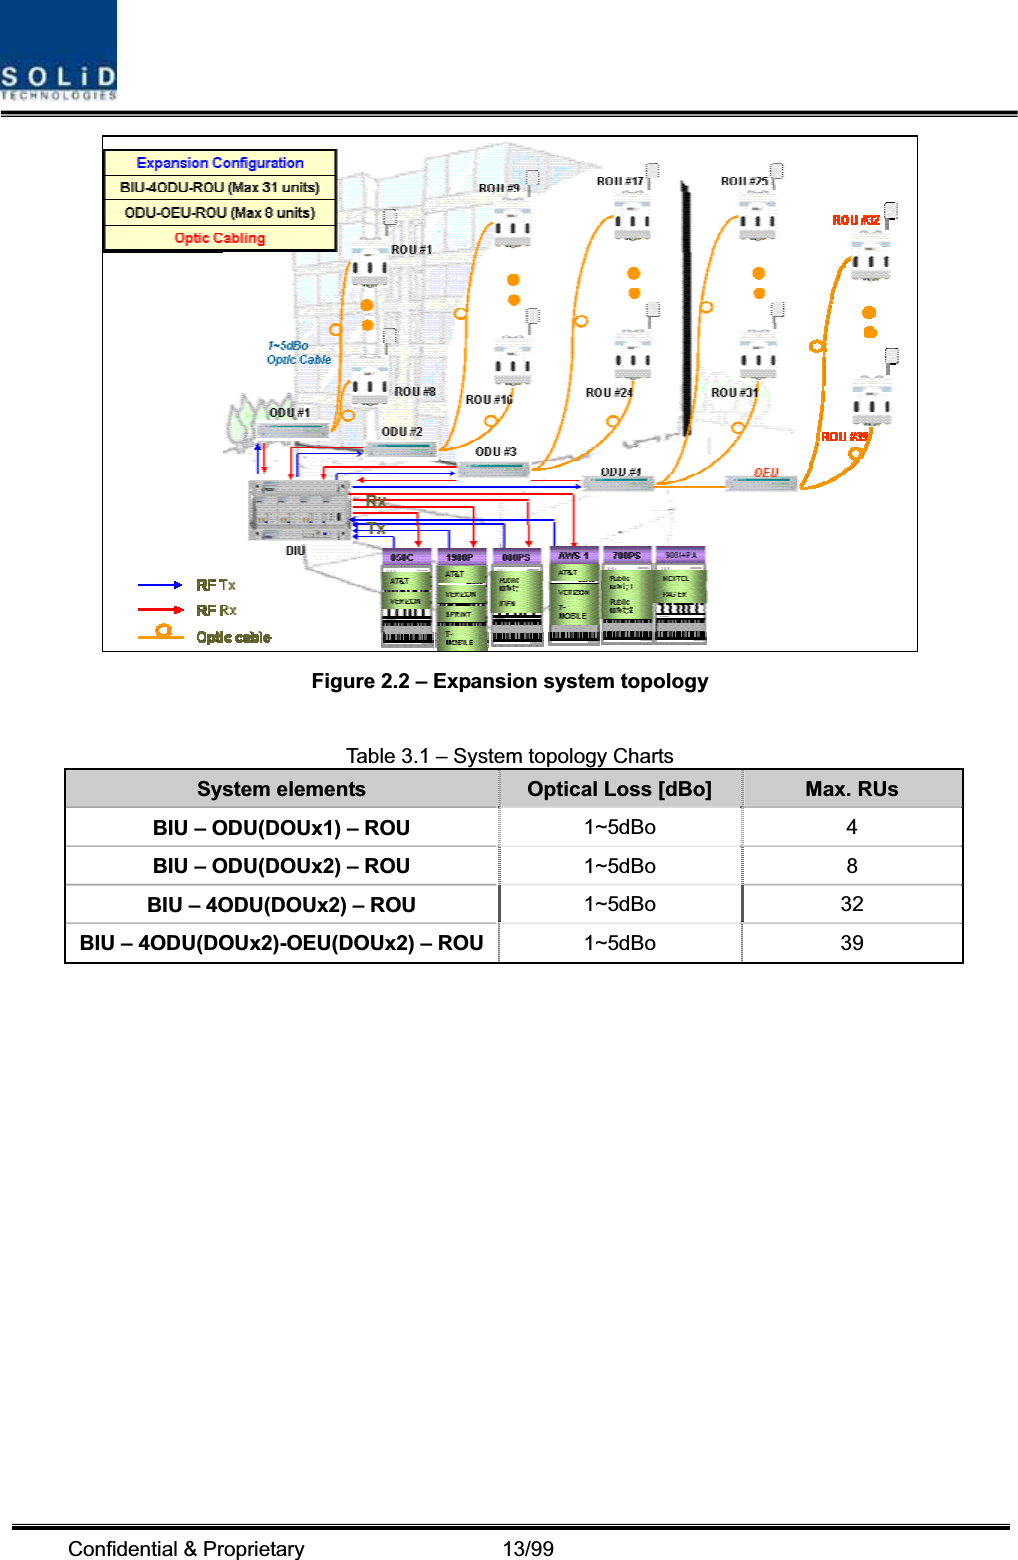 Confidential &amp; Proprietary                   13/99 Figure 2.2 – Expansion system topology   Table 3.1 – System topology Charts System elements  Optical Loss [dBo]  Max. RUs BIU – ODU(DOUx1) – ROU    1~5dBo 4 BIU – ODU(DOUx2) – ROU  1~5dBo 8 BIU – 4ODU(DOUx2) – ROU  1~5dBo 32 BIU – 4ODU(DOUx2)-OEU(DOUx2) – ROU 1~5dBo 39 